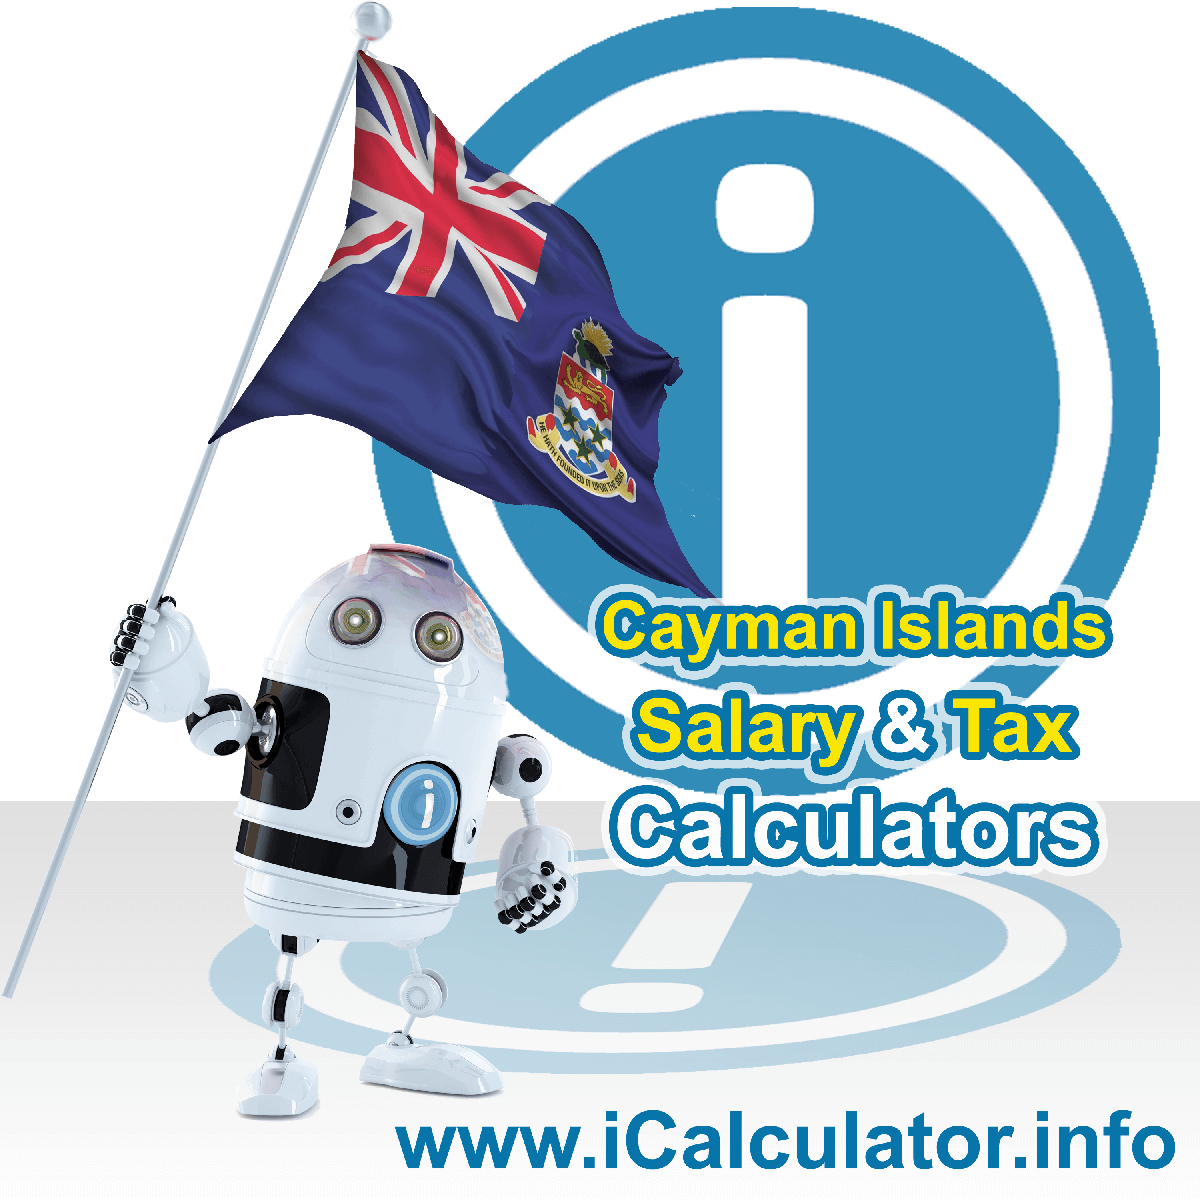 Cayman Islands Salary Calculator. This image shows the Cayman Islandsese flag and information relating to the tax formula for the Cayman Islands Tax Calculator